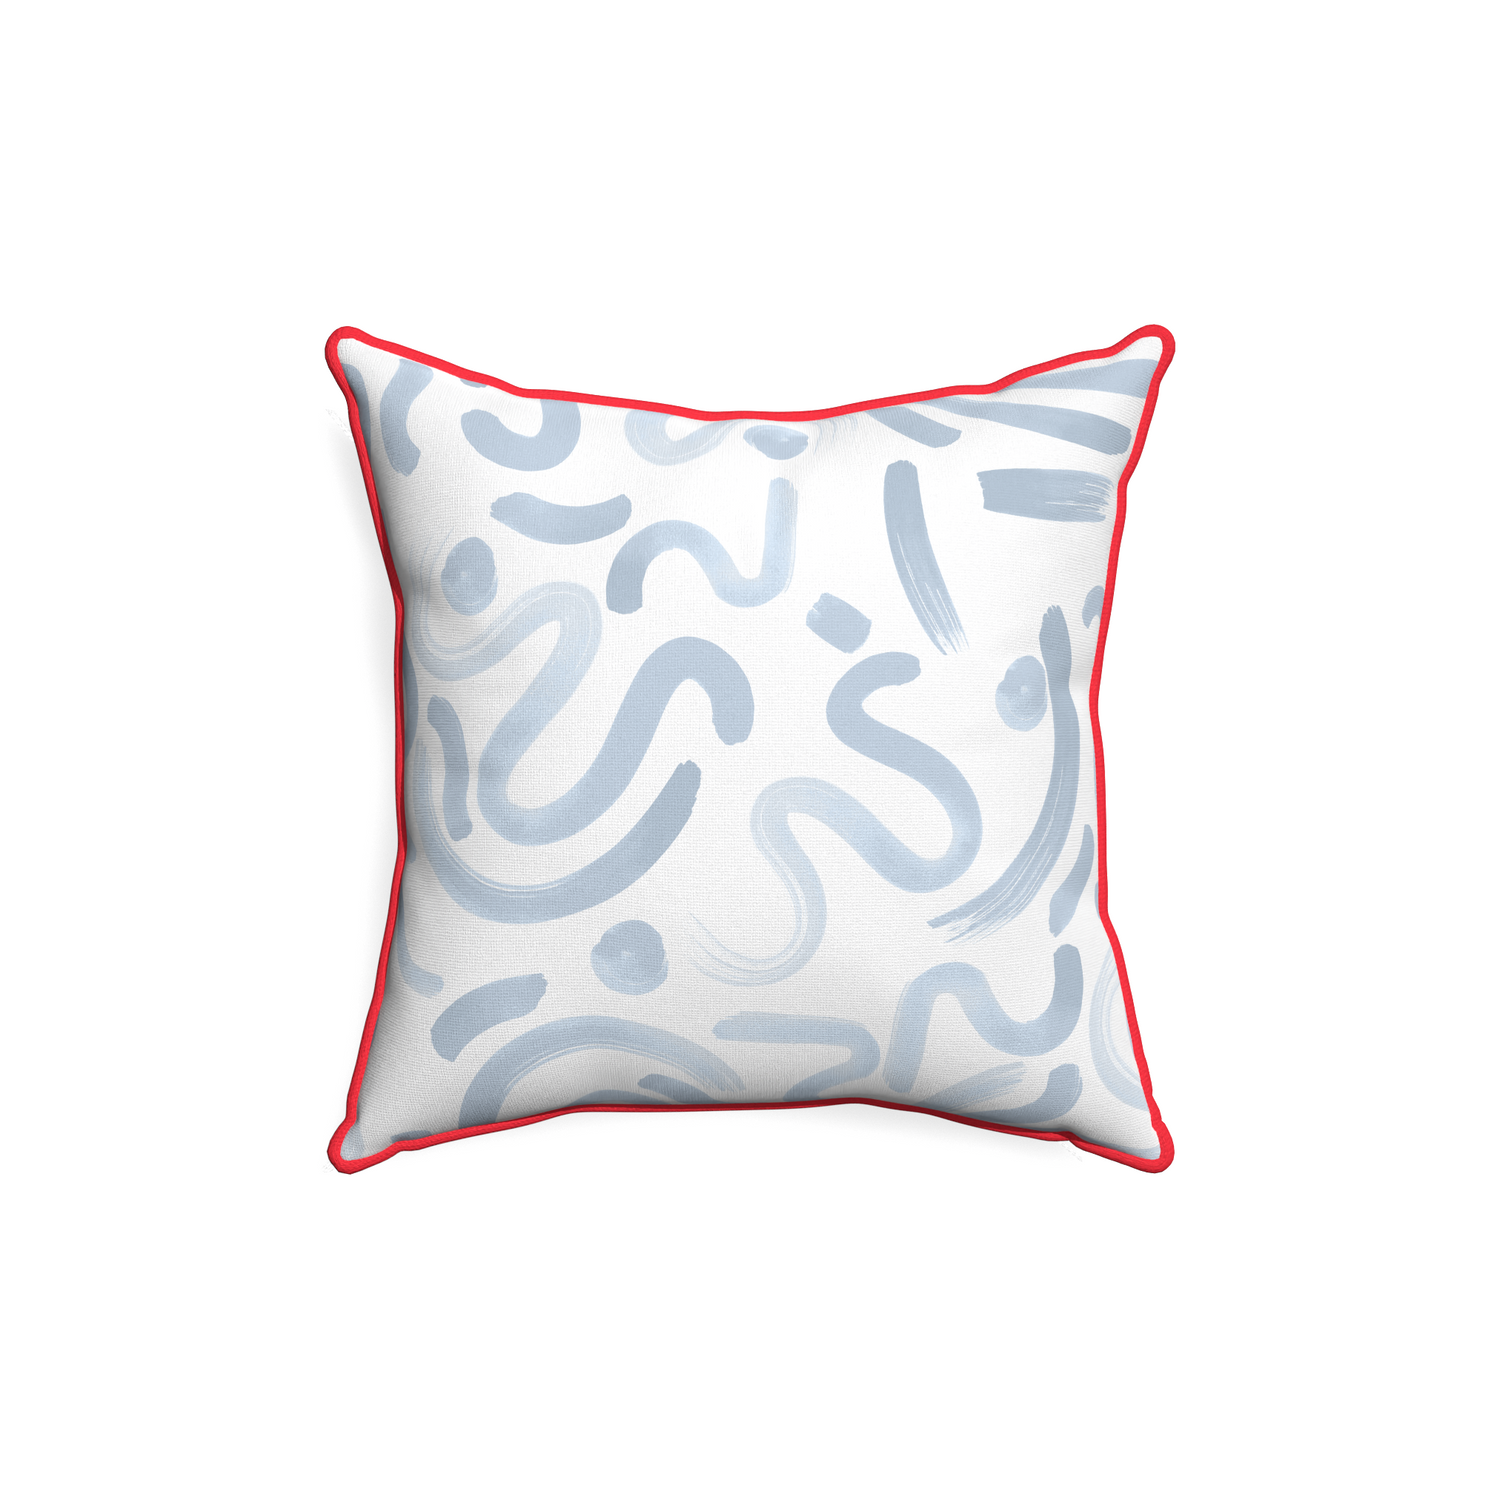 18-square hockney sky custom pillow with cherry piping on white background